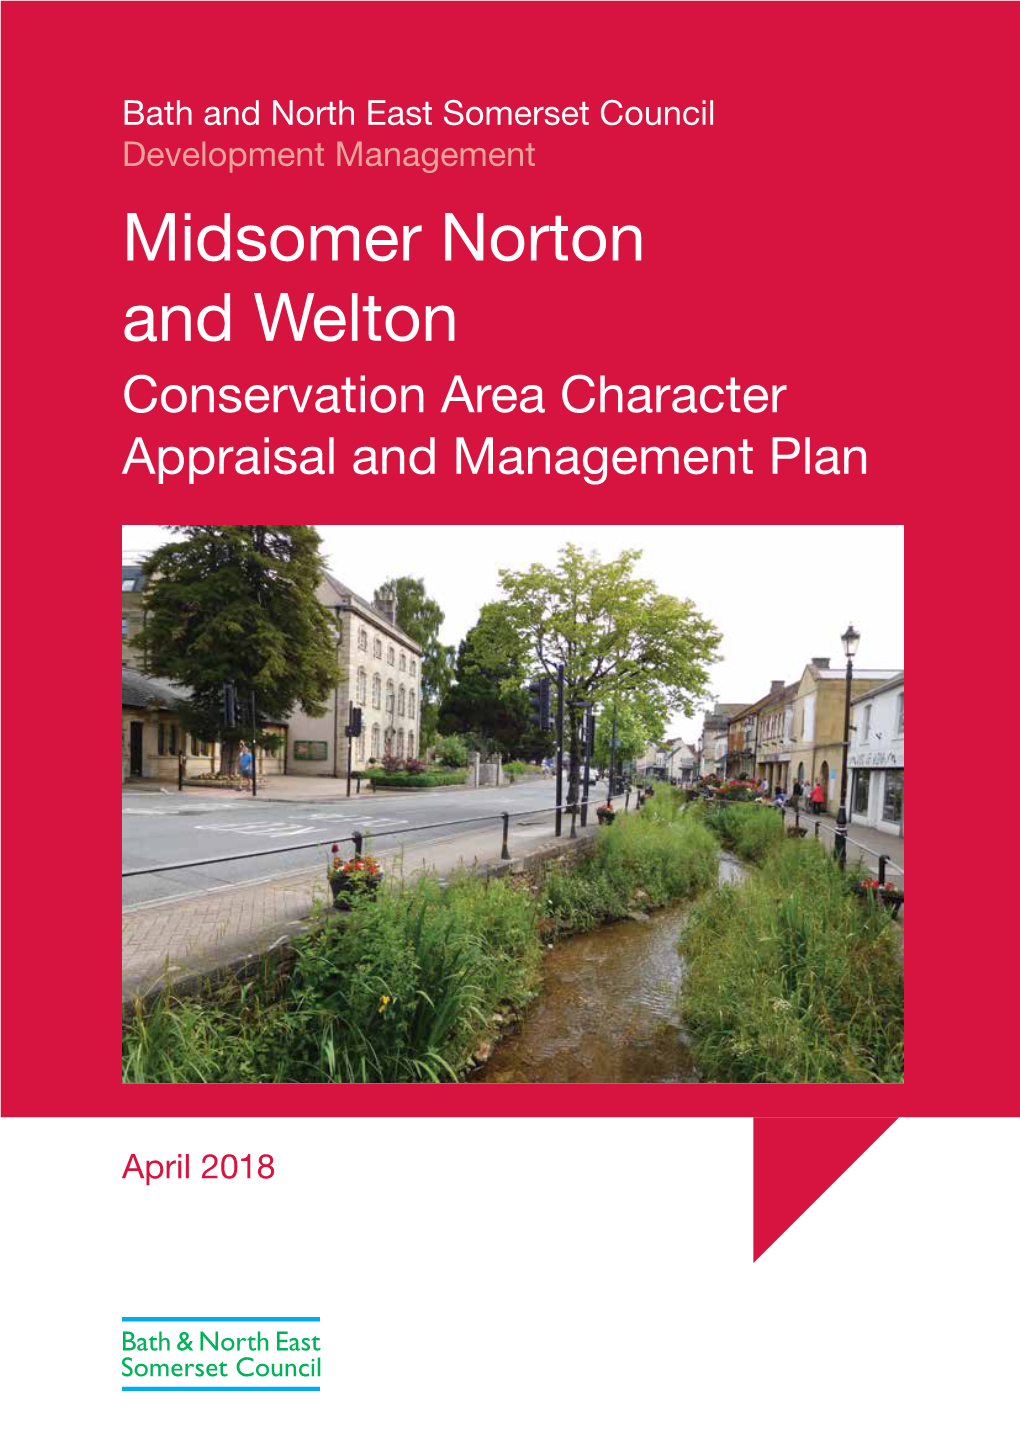 Bath and North East Somerset Council Development Management Midsomer Norton and Welton Conservation Area Character Appraisal and Management Plan